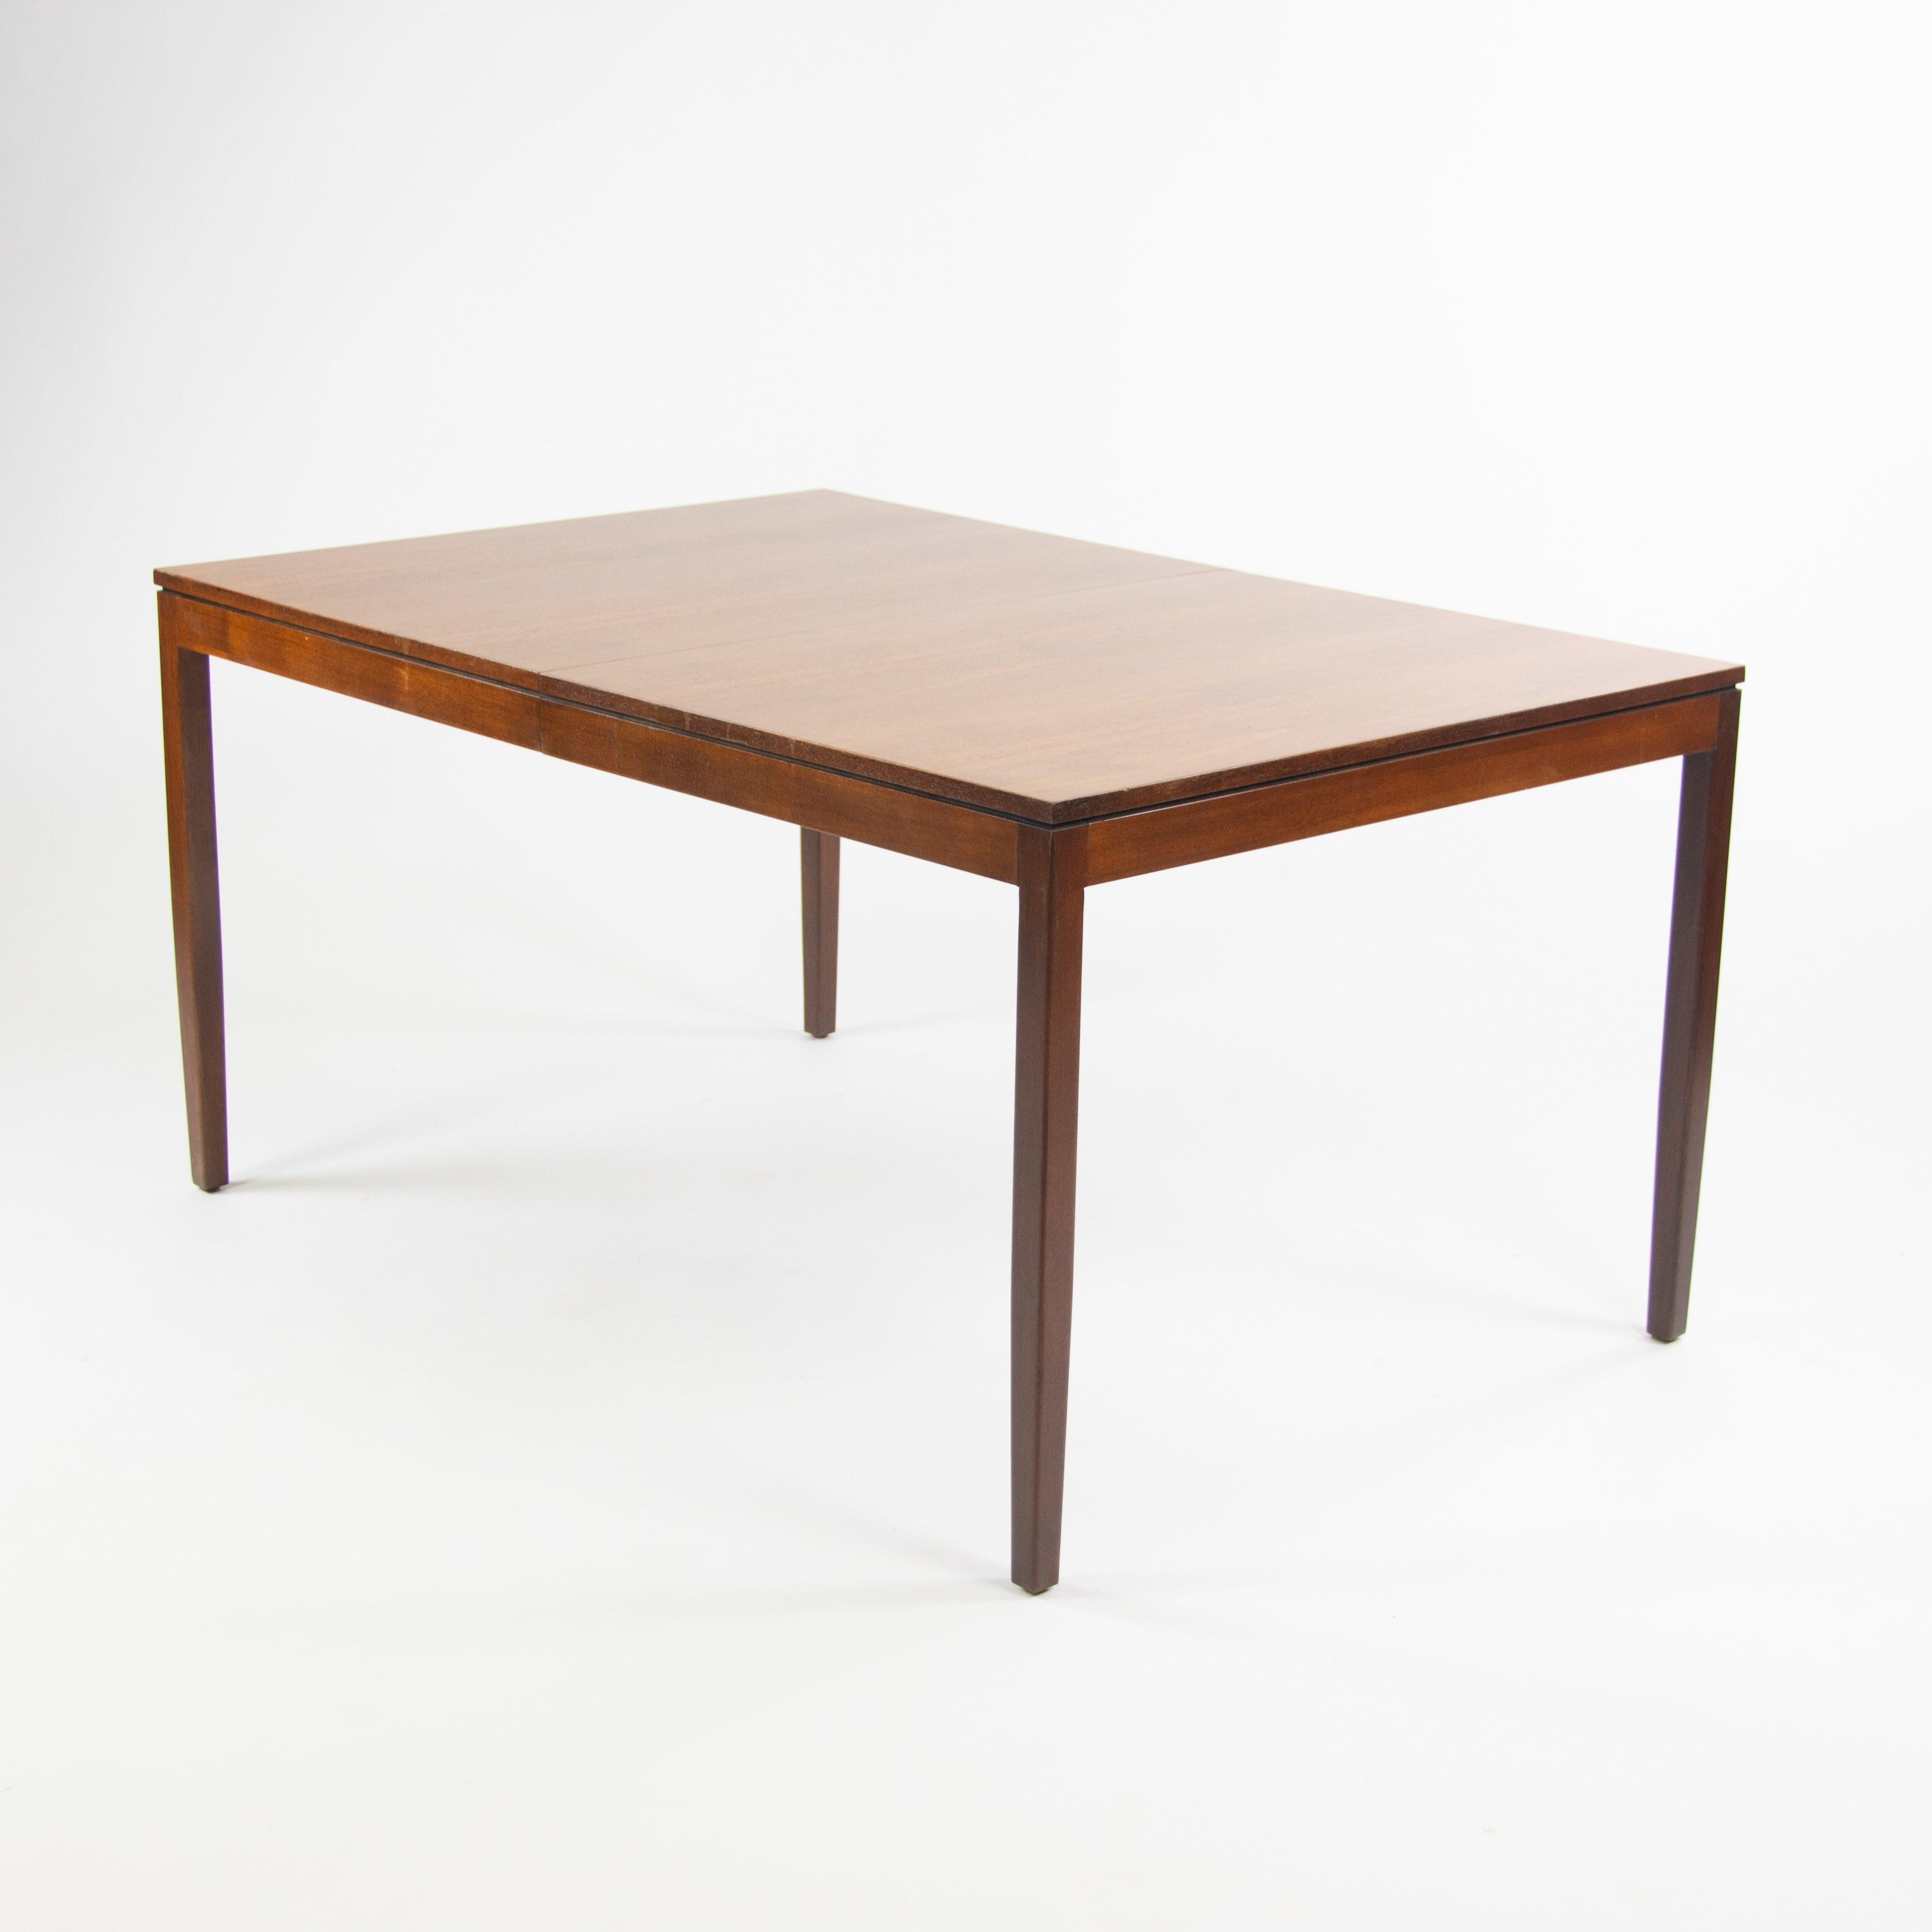 Modern 1950's Rare Original Florence Knoll Walnut Dining Table w/ Leaf 56-84 inches